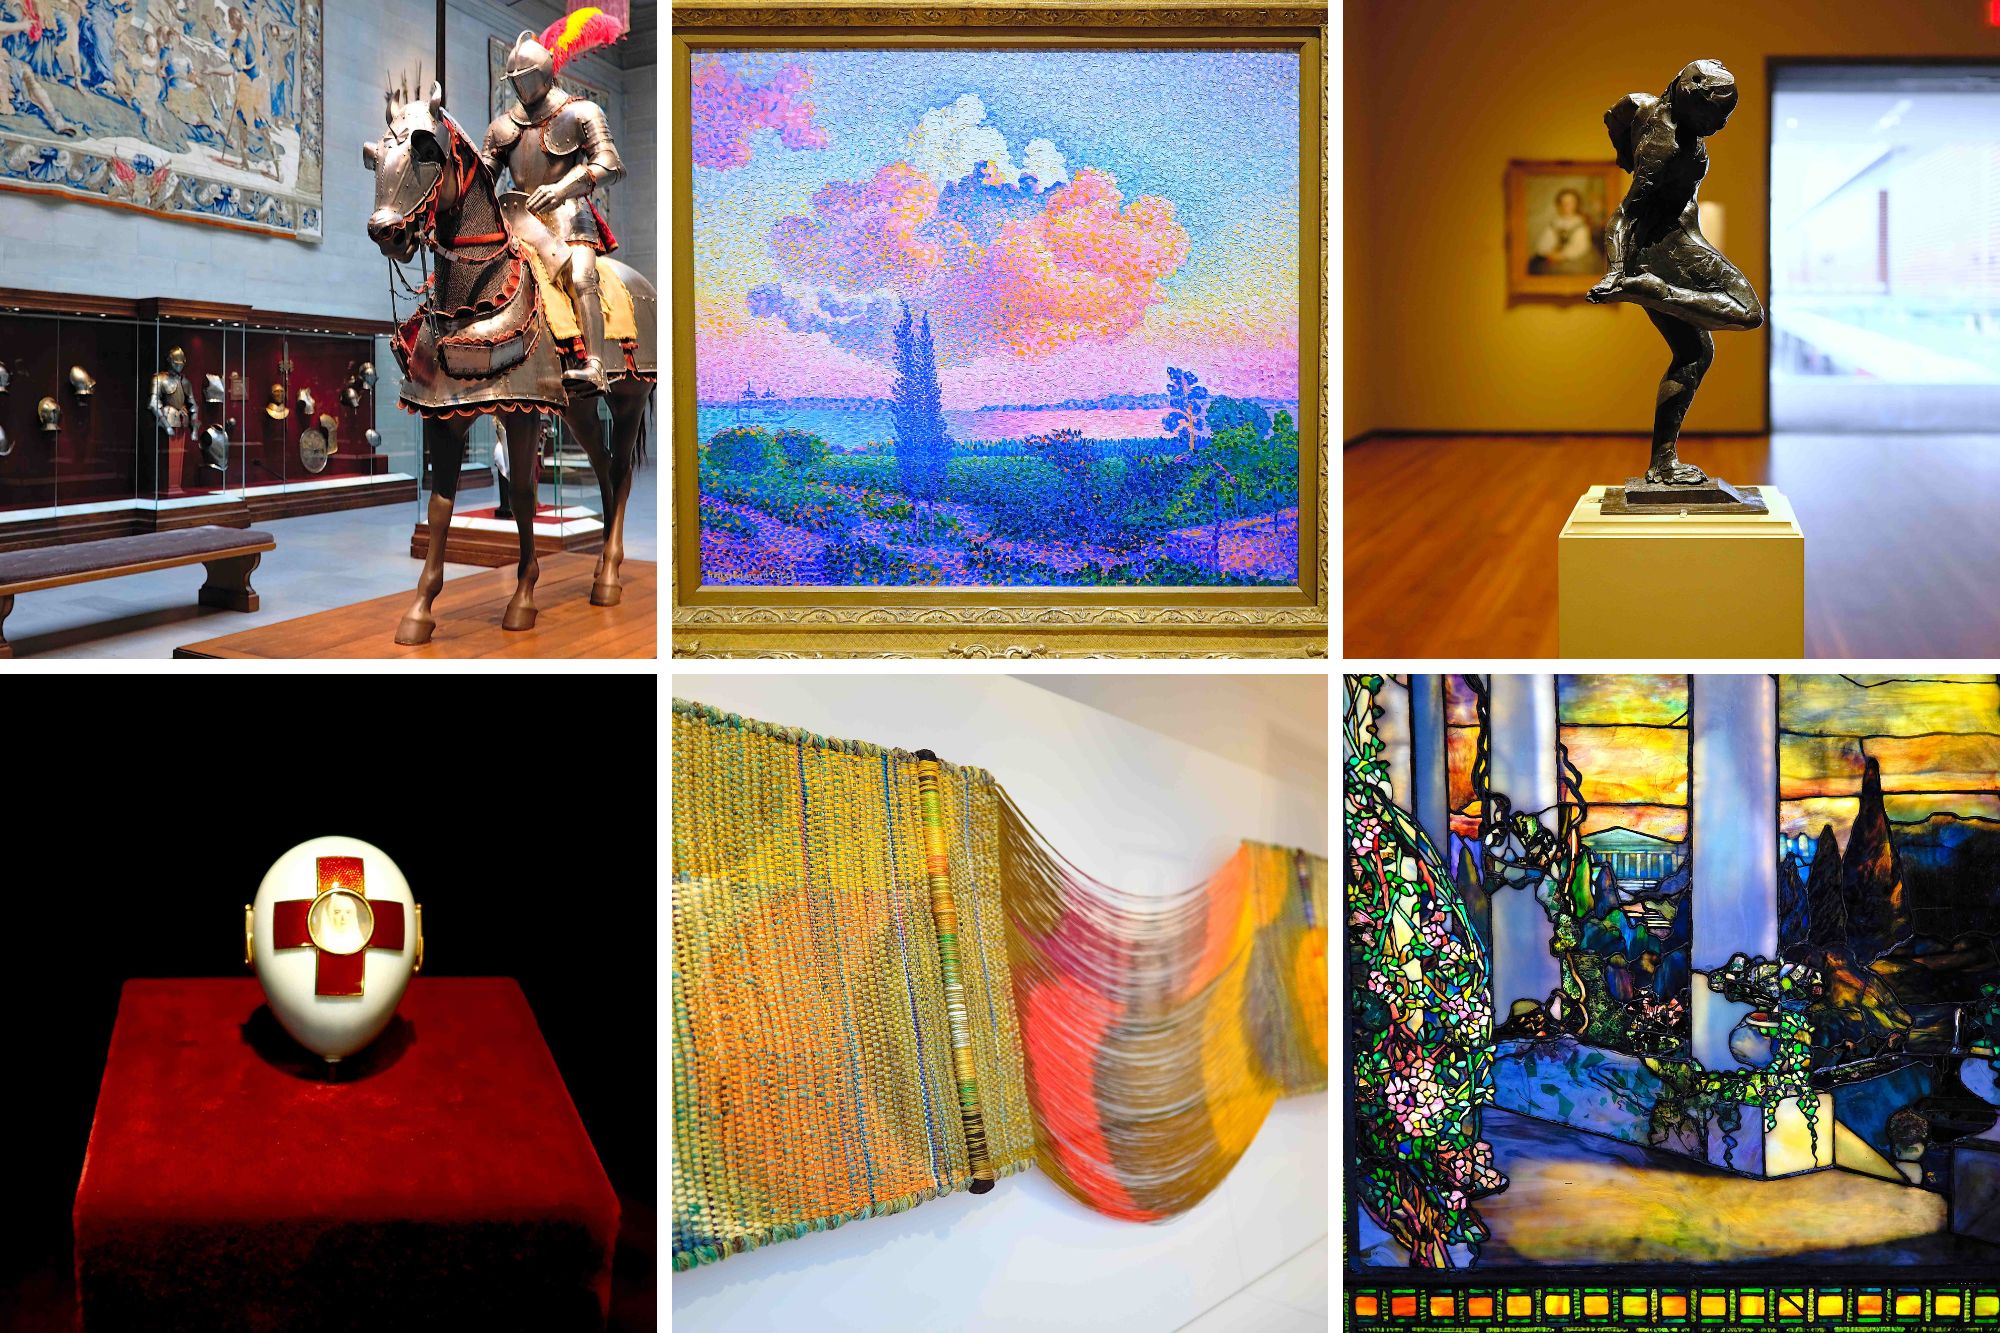 Six works from The Cleveland Museum of Art